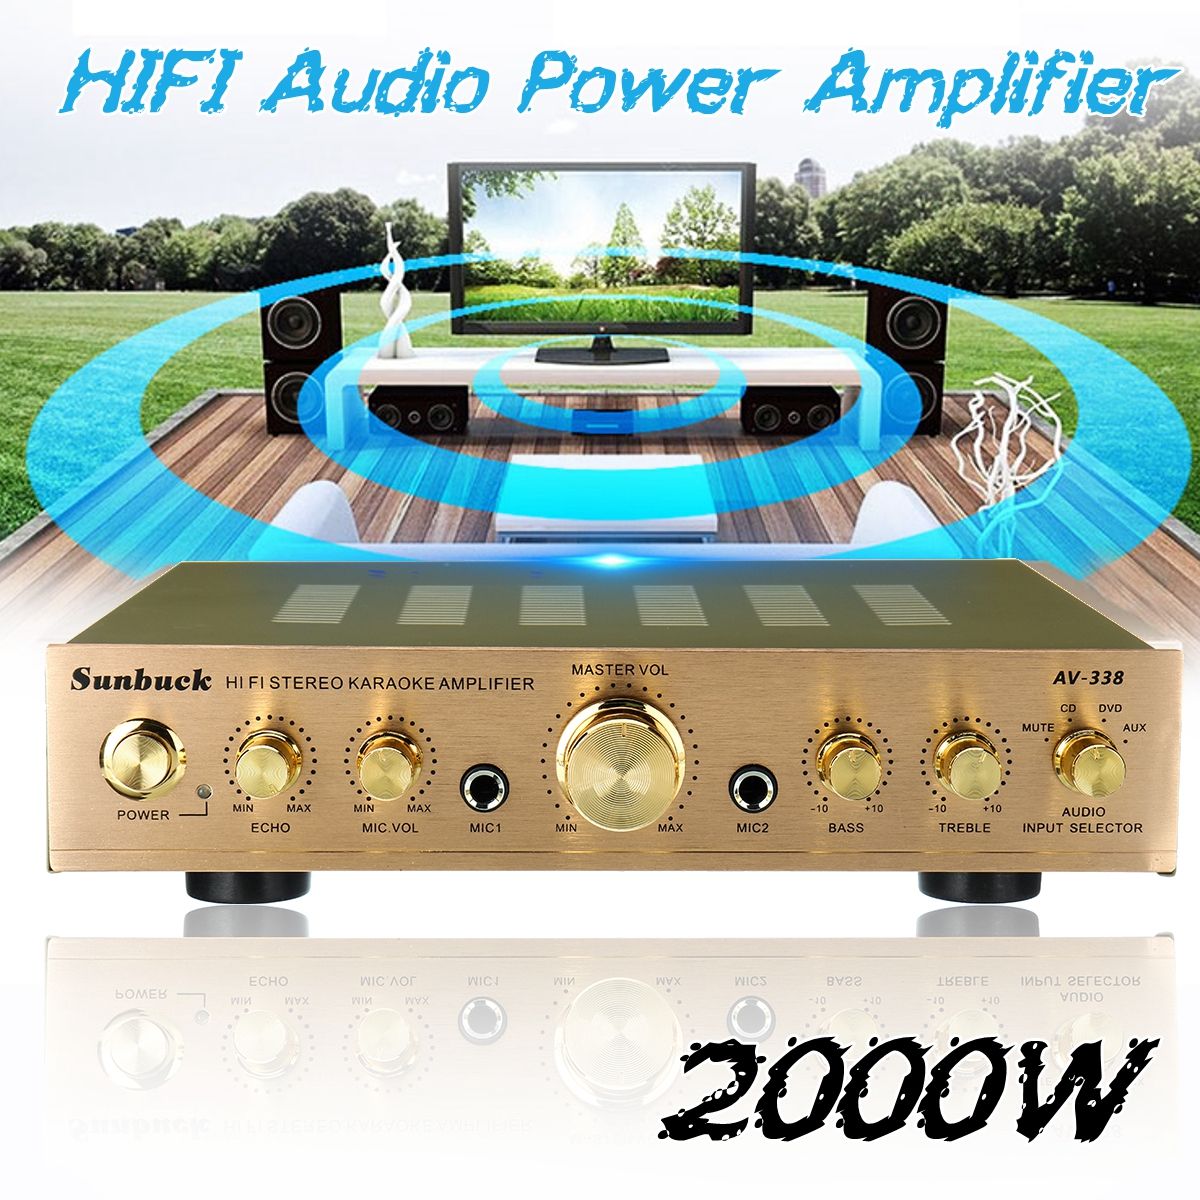 Stereo-Power-Amplifier-2000W-110V-220V-5-Channel-Equalizer-Car-Amplifier-Home-Theater-Amplifiers-Aud-1639939